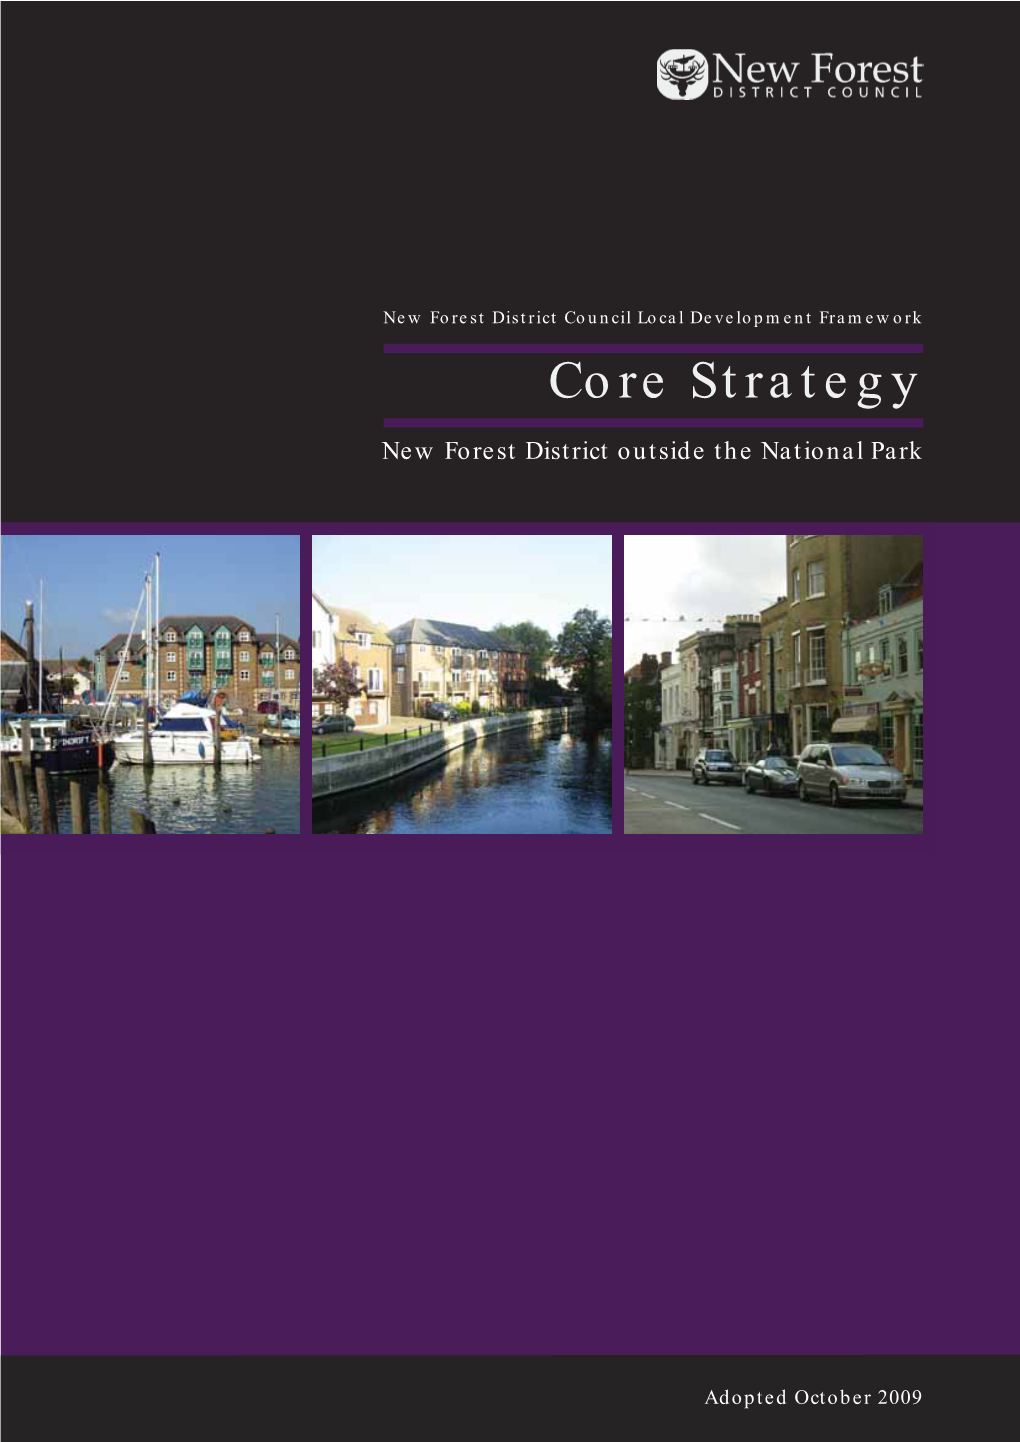 Policies of the Core Strategy (2009)